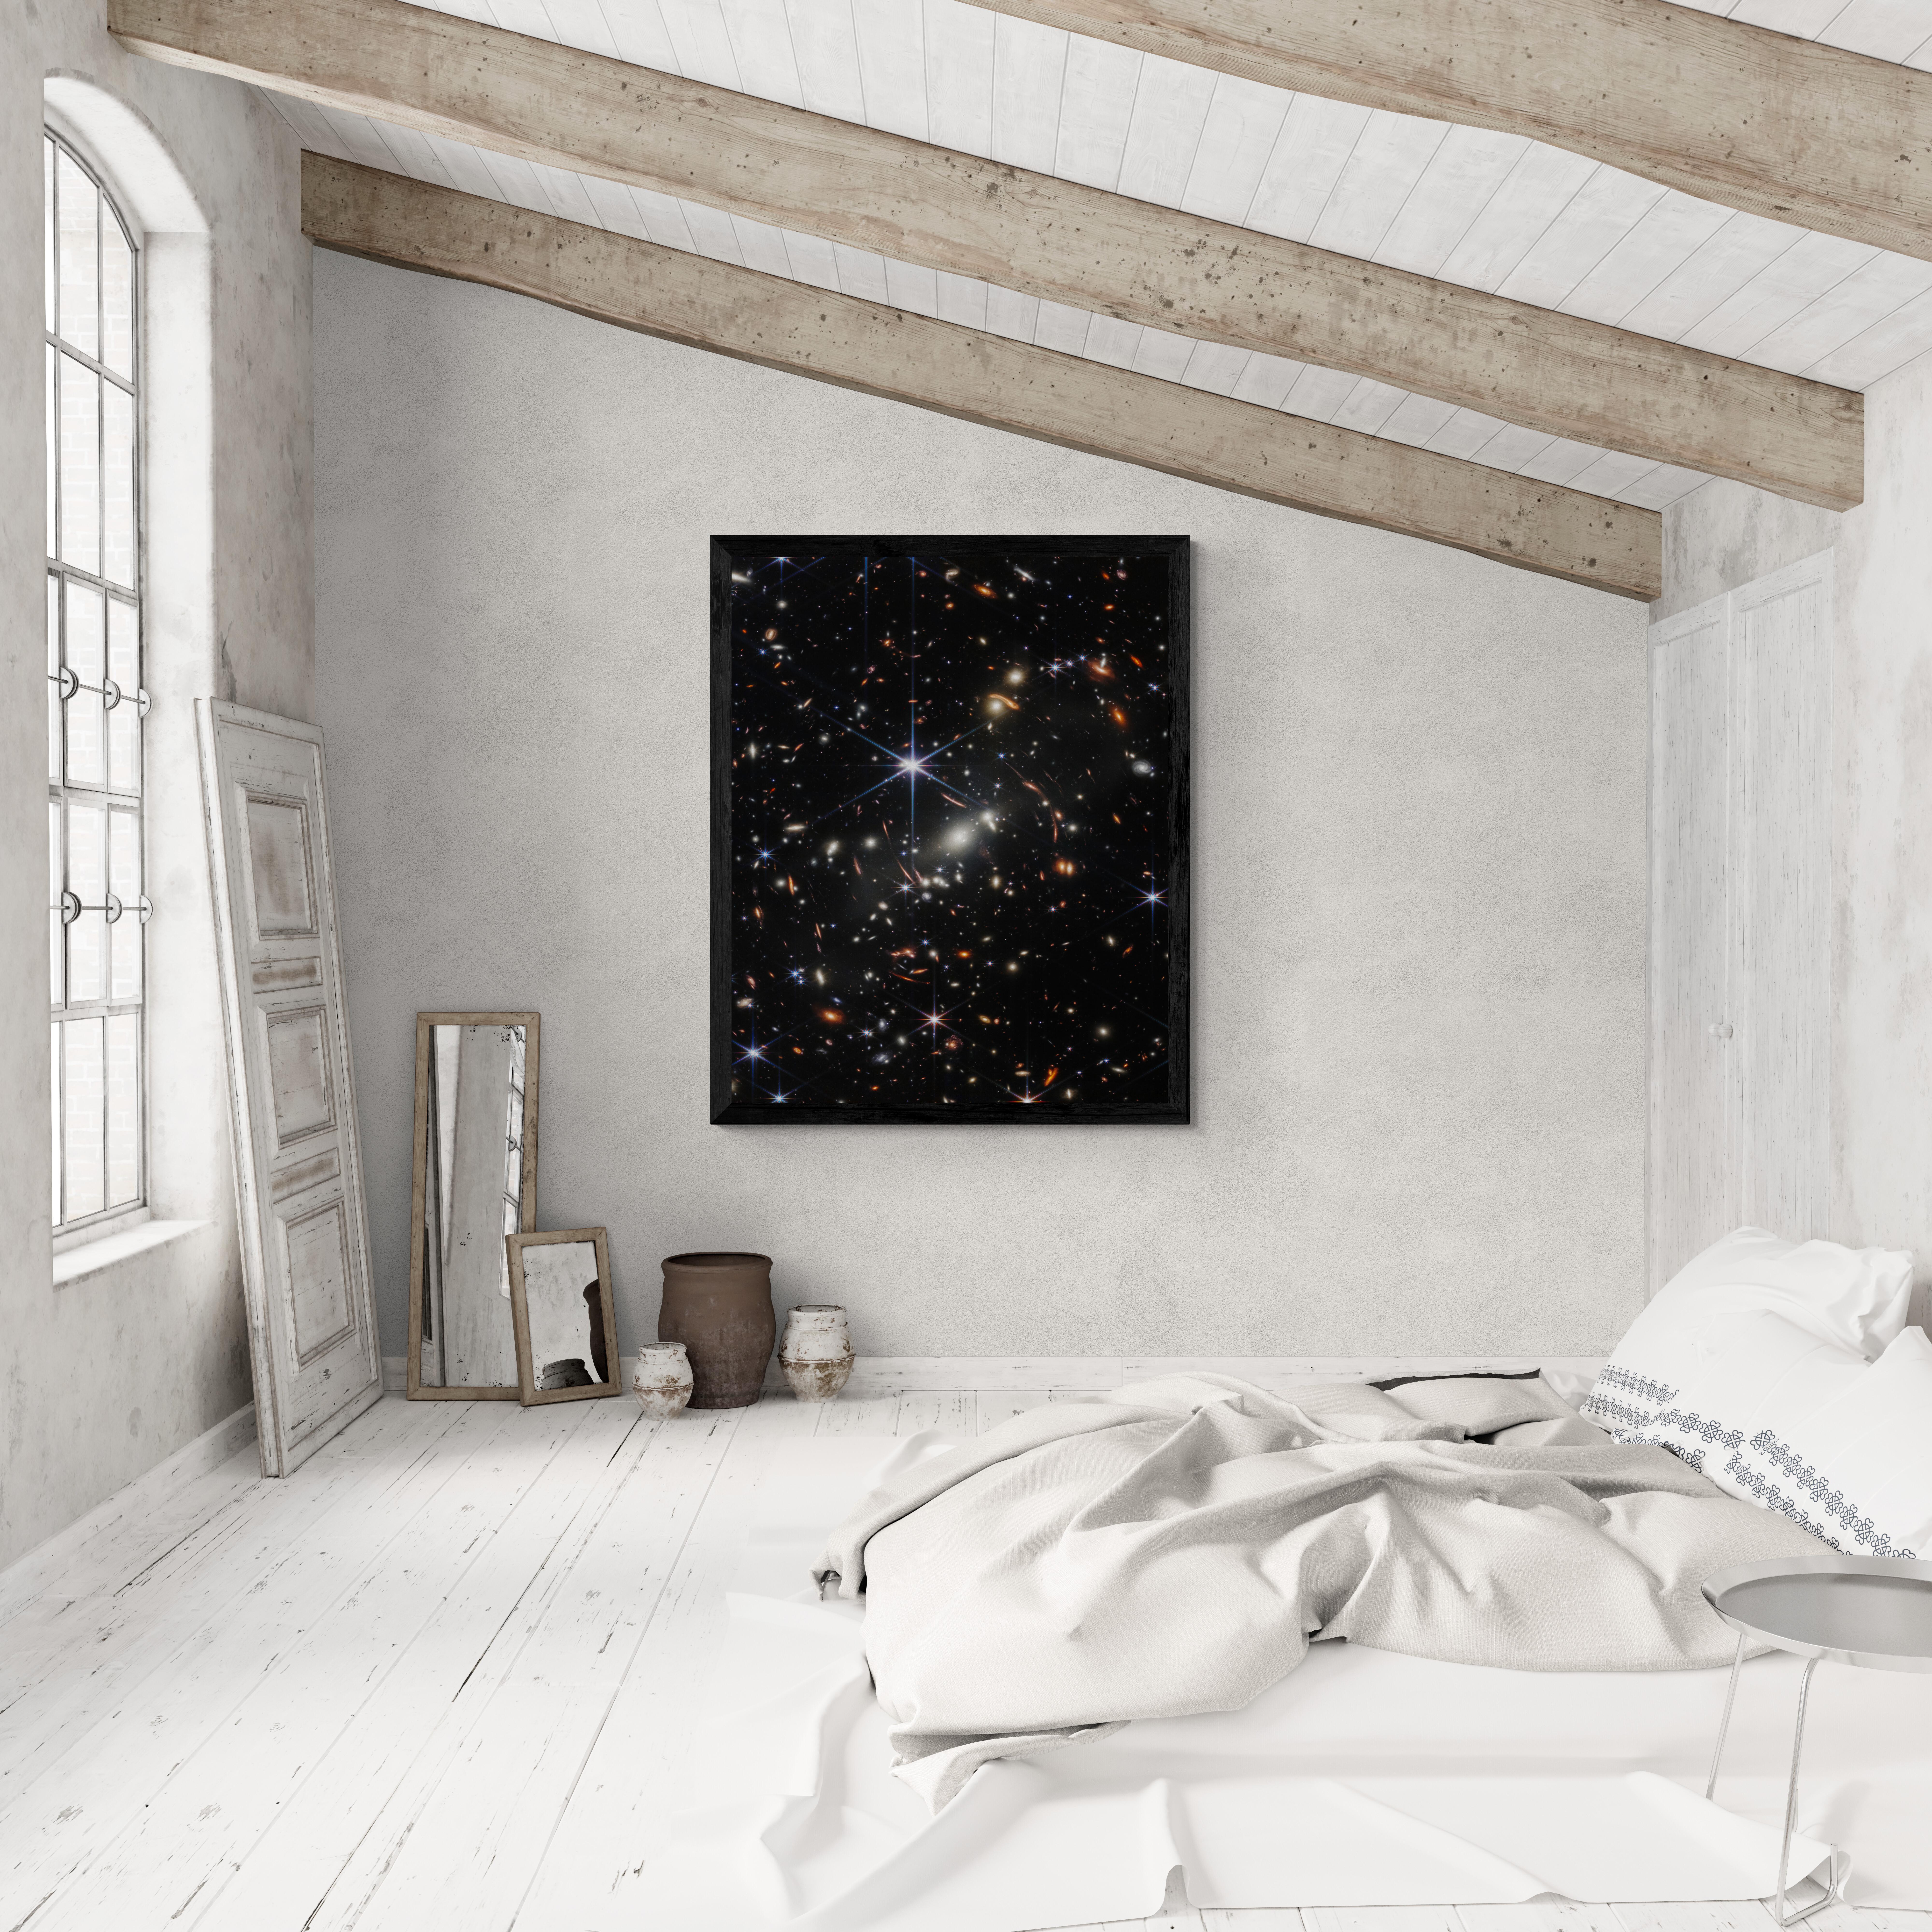 Original museum grade exhibition prints on acid-free archival luster paper.  These are the highest quality NASA prints ever produced. 
*This print can be hung vertical or horizontal

President Joe Biden recently revealed this stunning image of